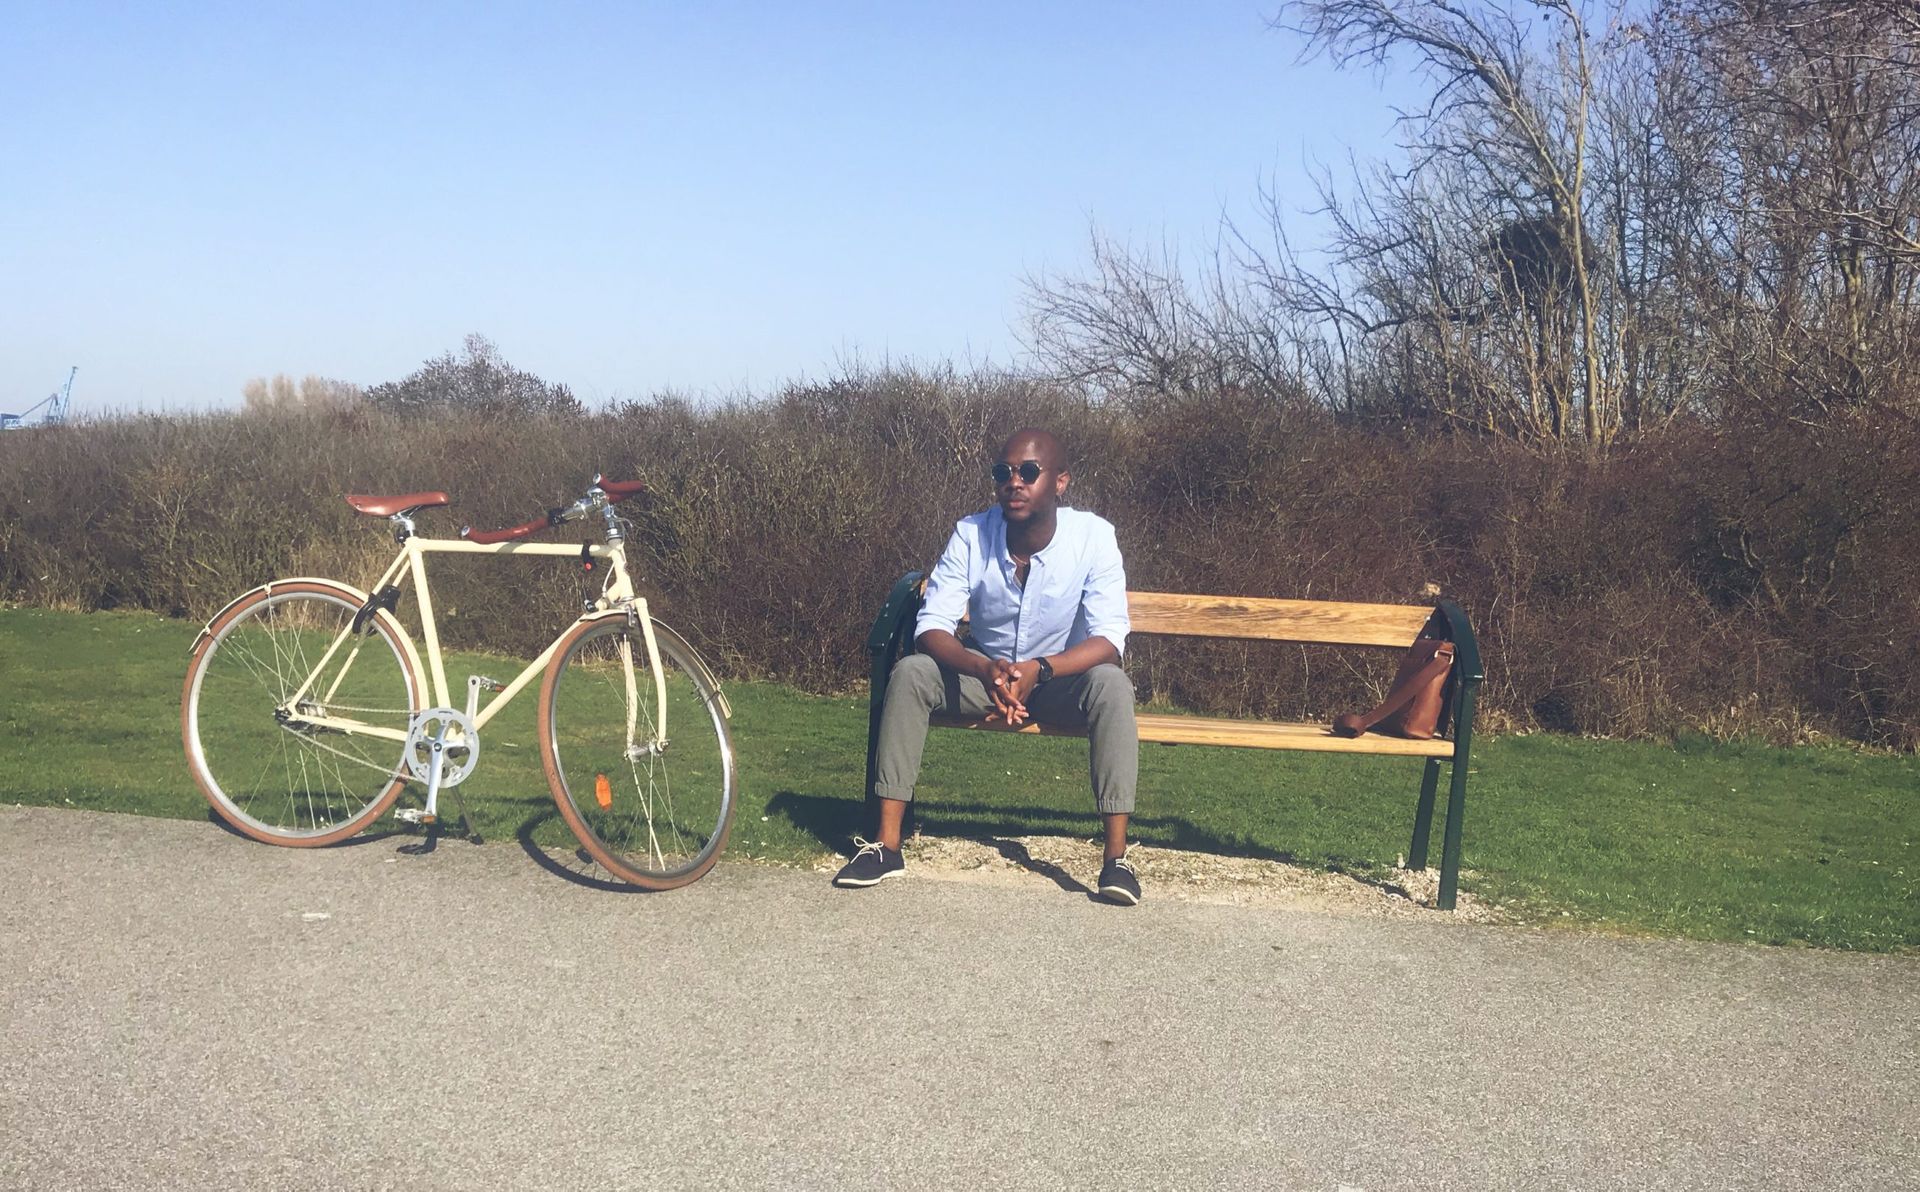 A photo of Sanjay relaxing with his bicycle